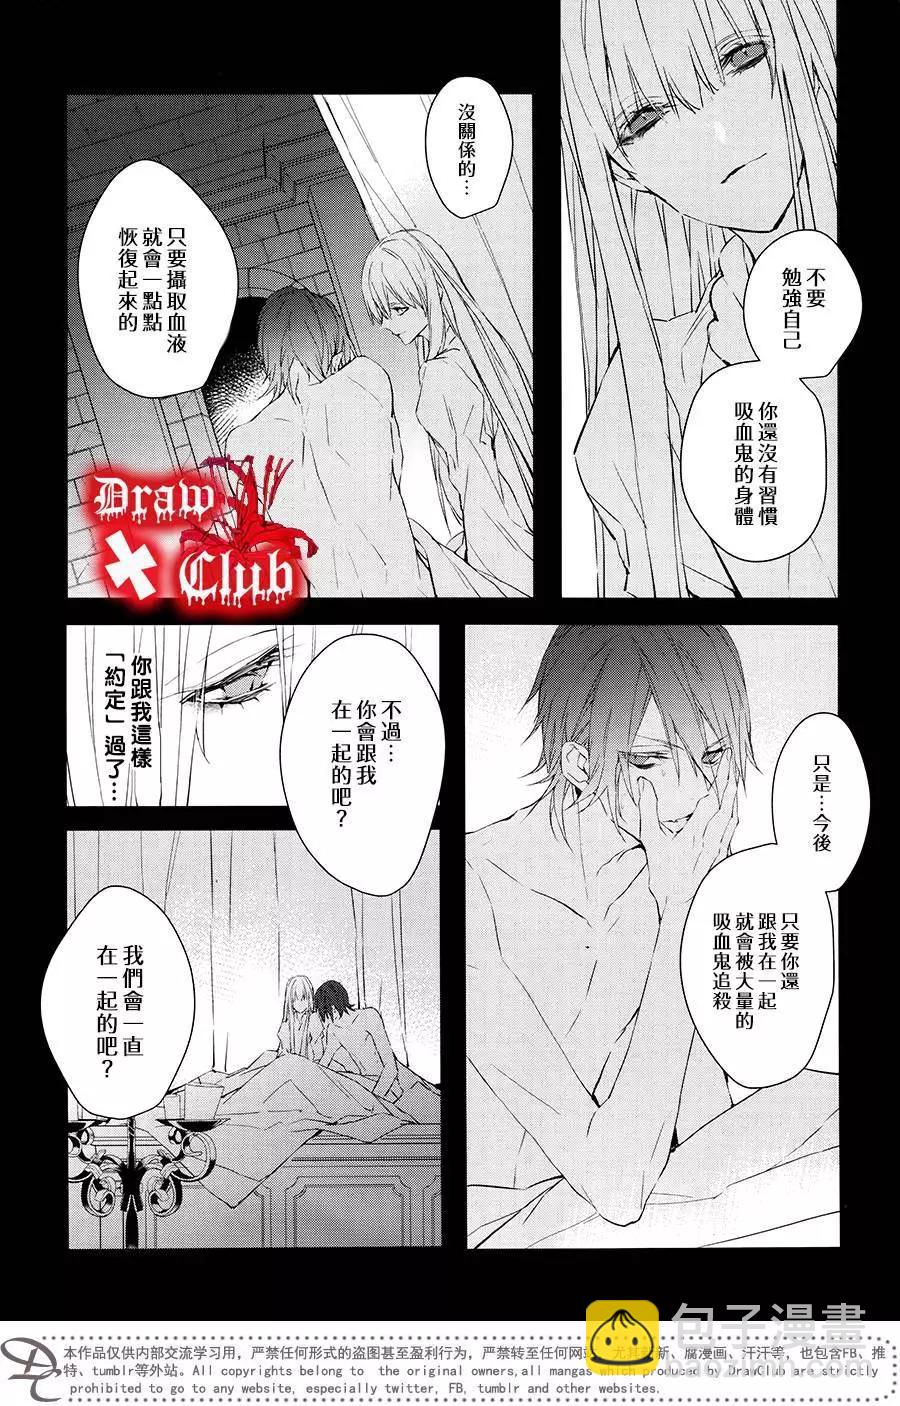 Bloody Mary - 第37回 - 1